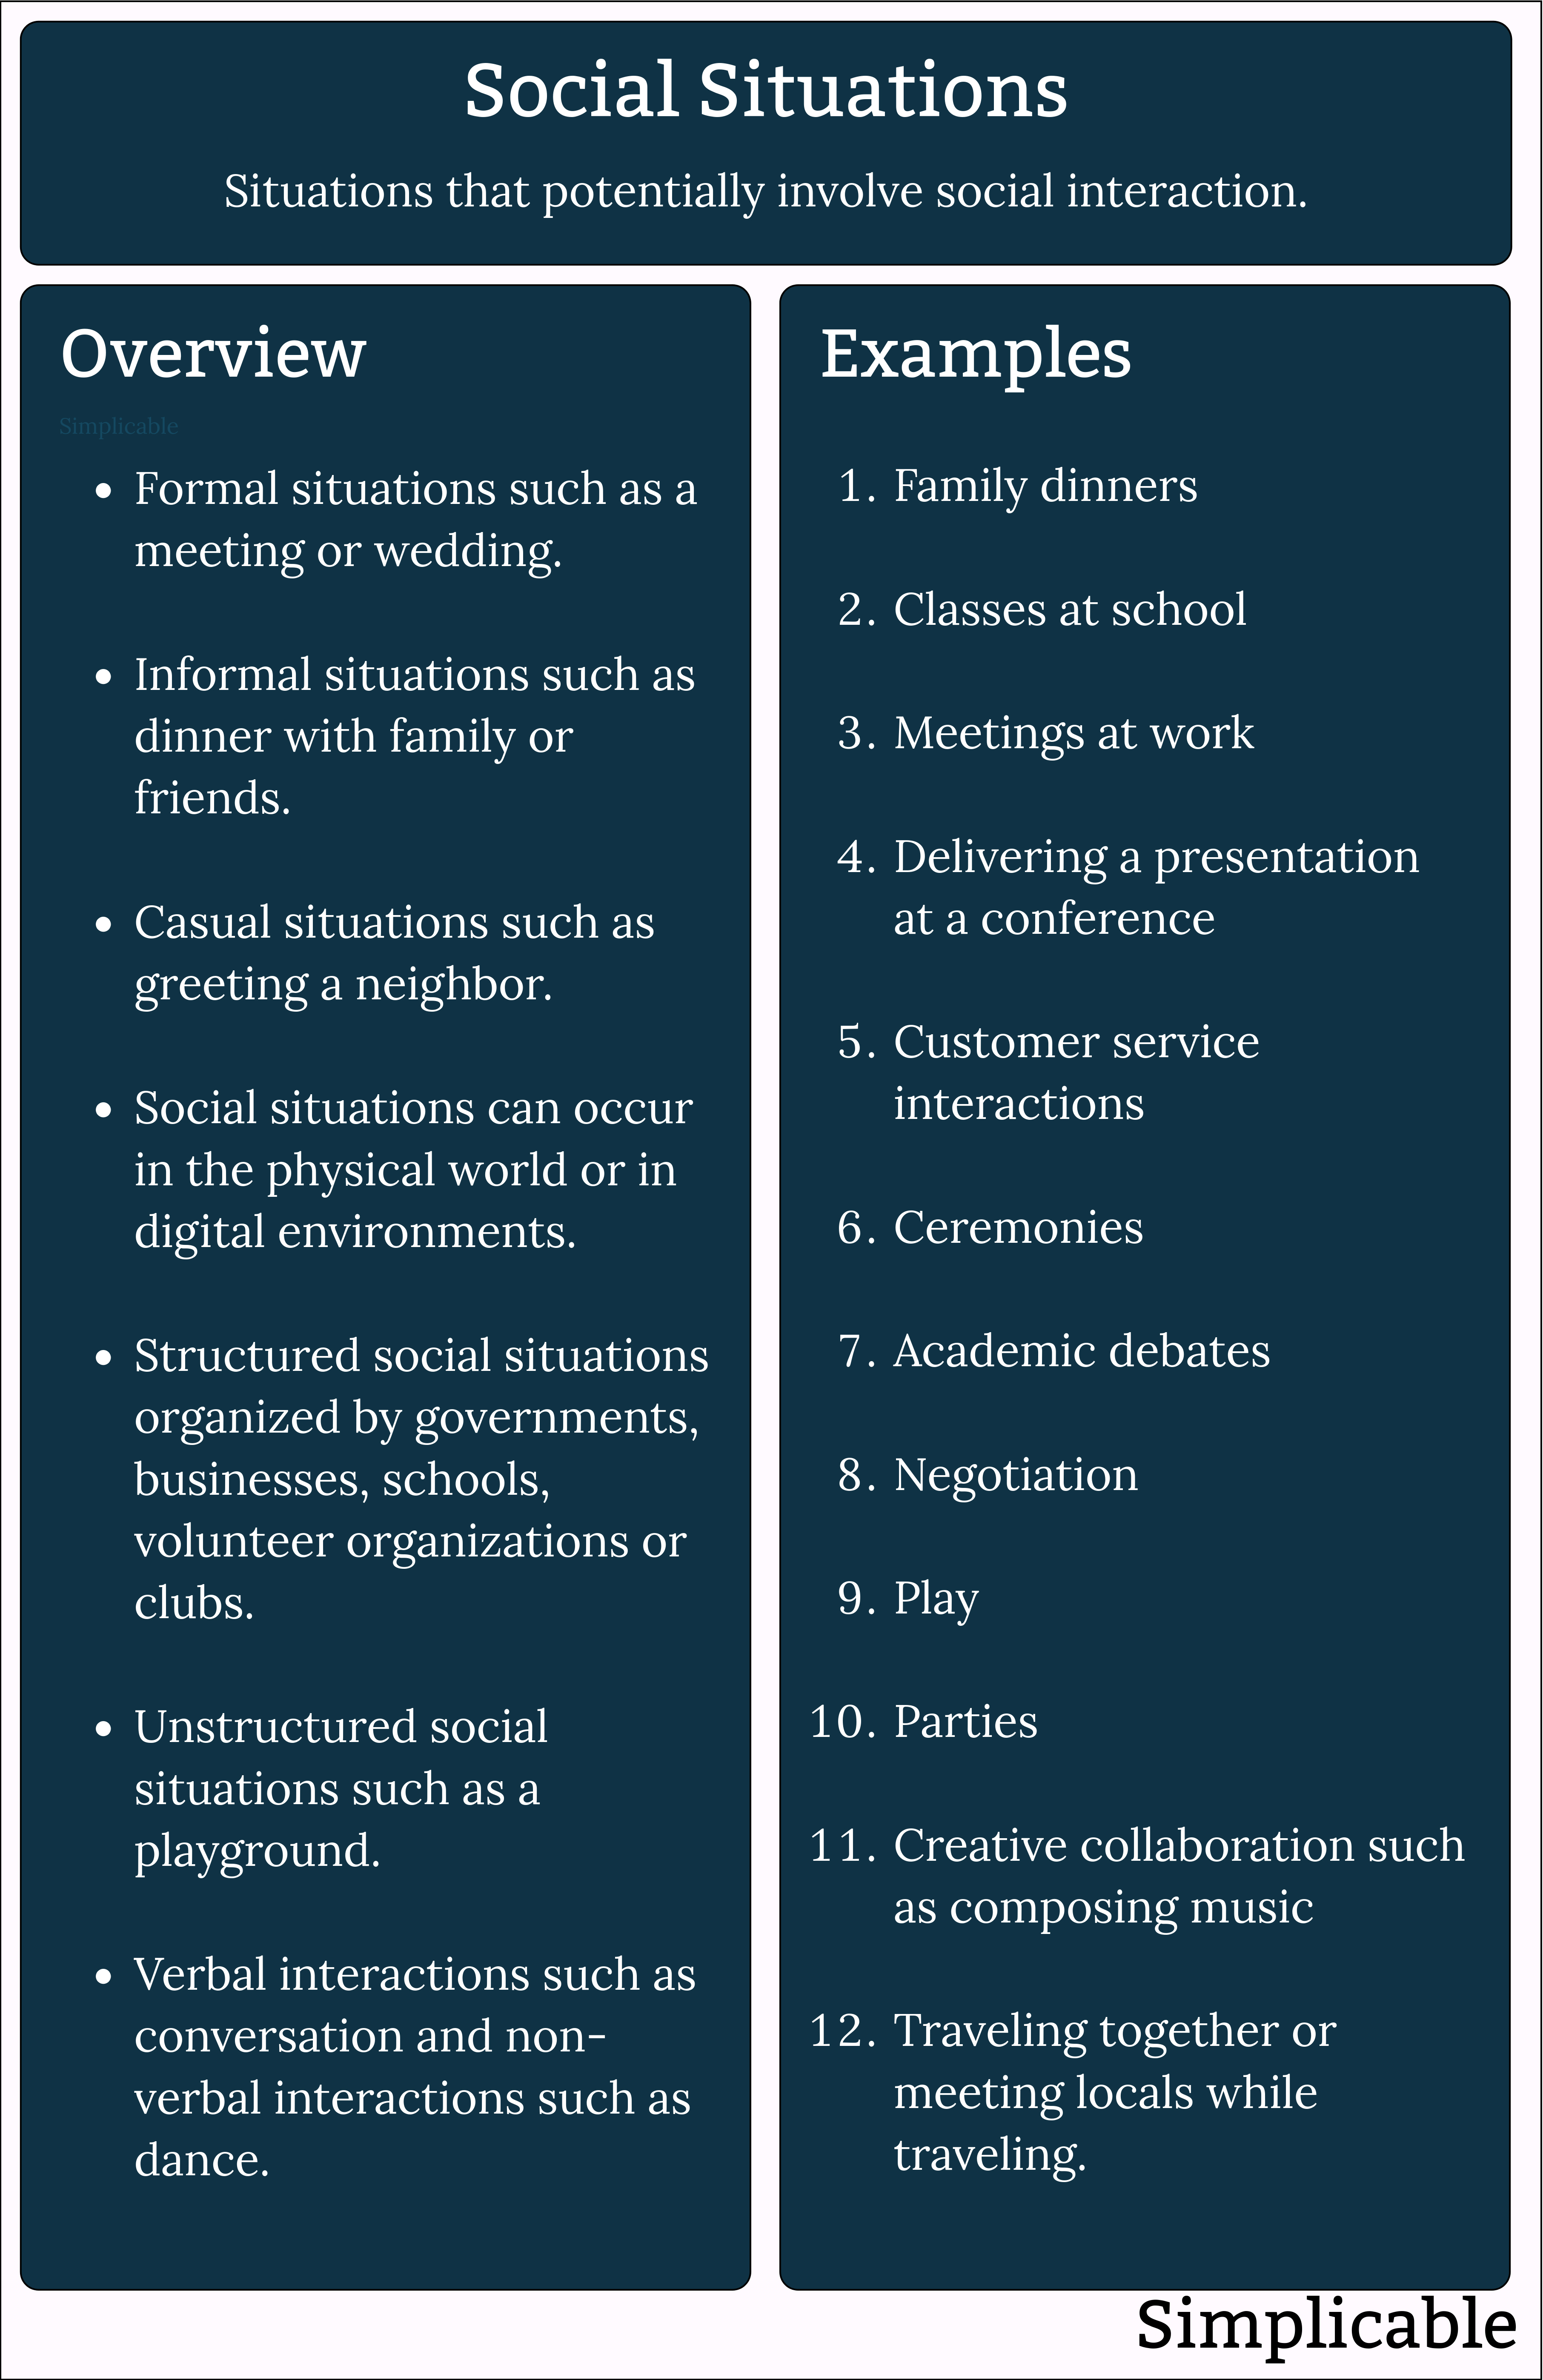 social situations overview and examples